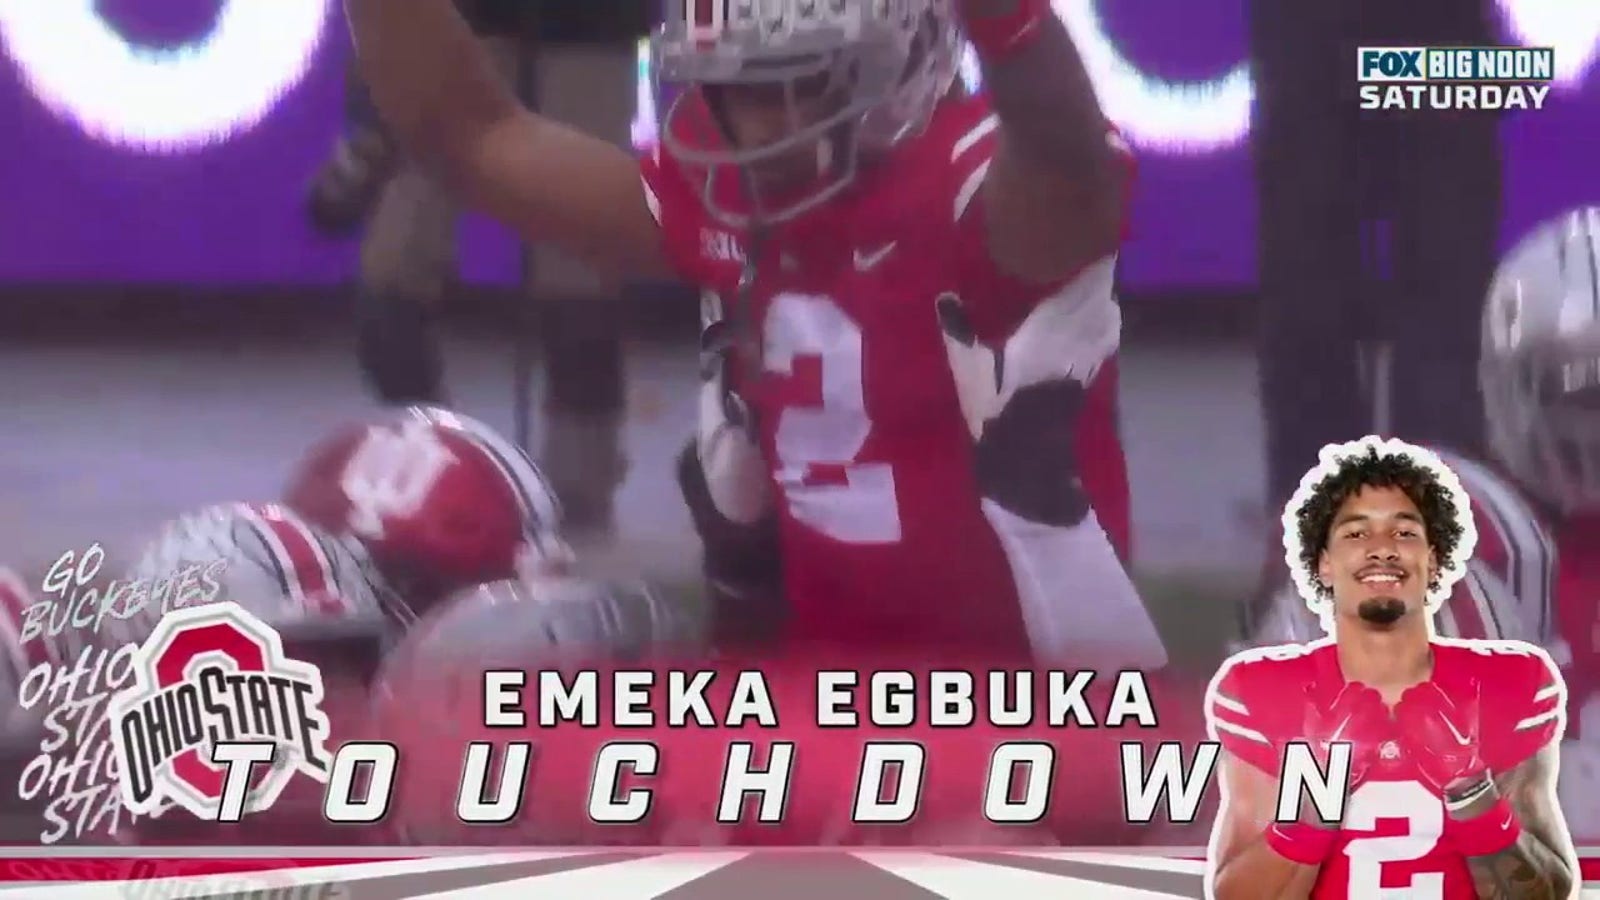 C.J. Stroud passed to Emeka Egbuka for a six-yard touchdown to lead Indiana 7-0